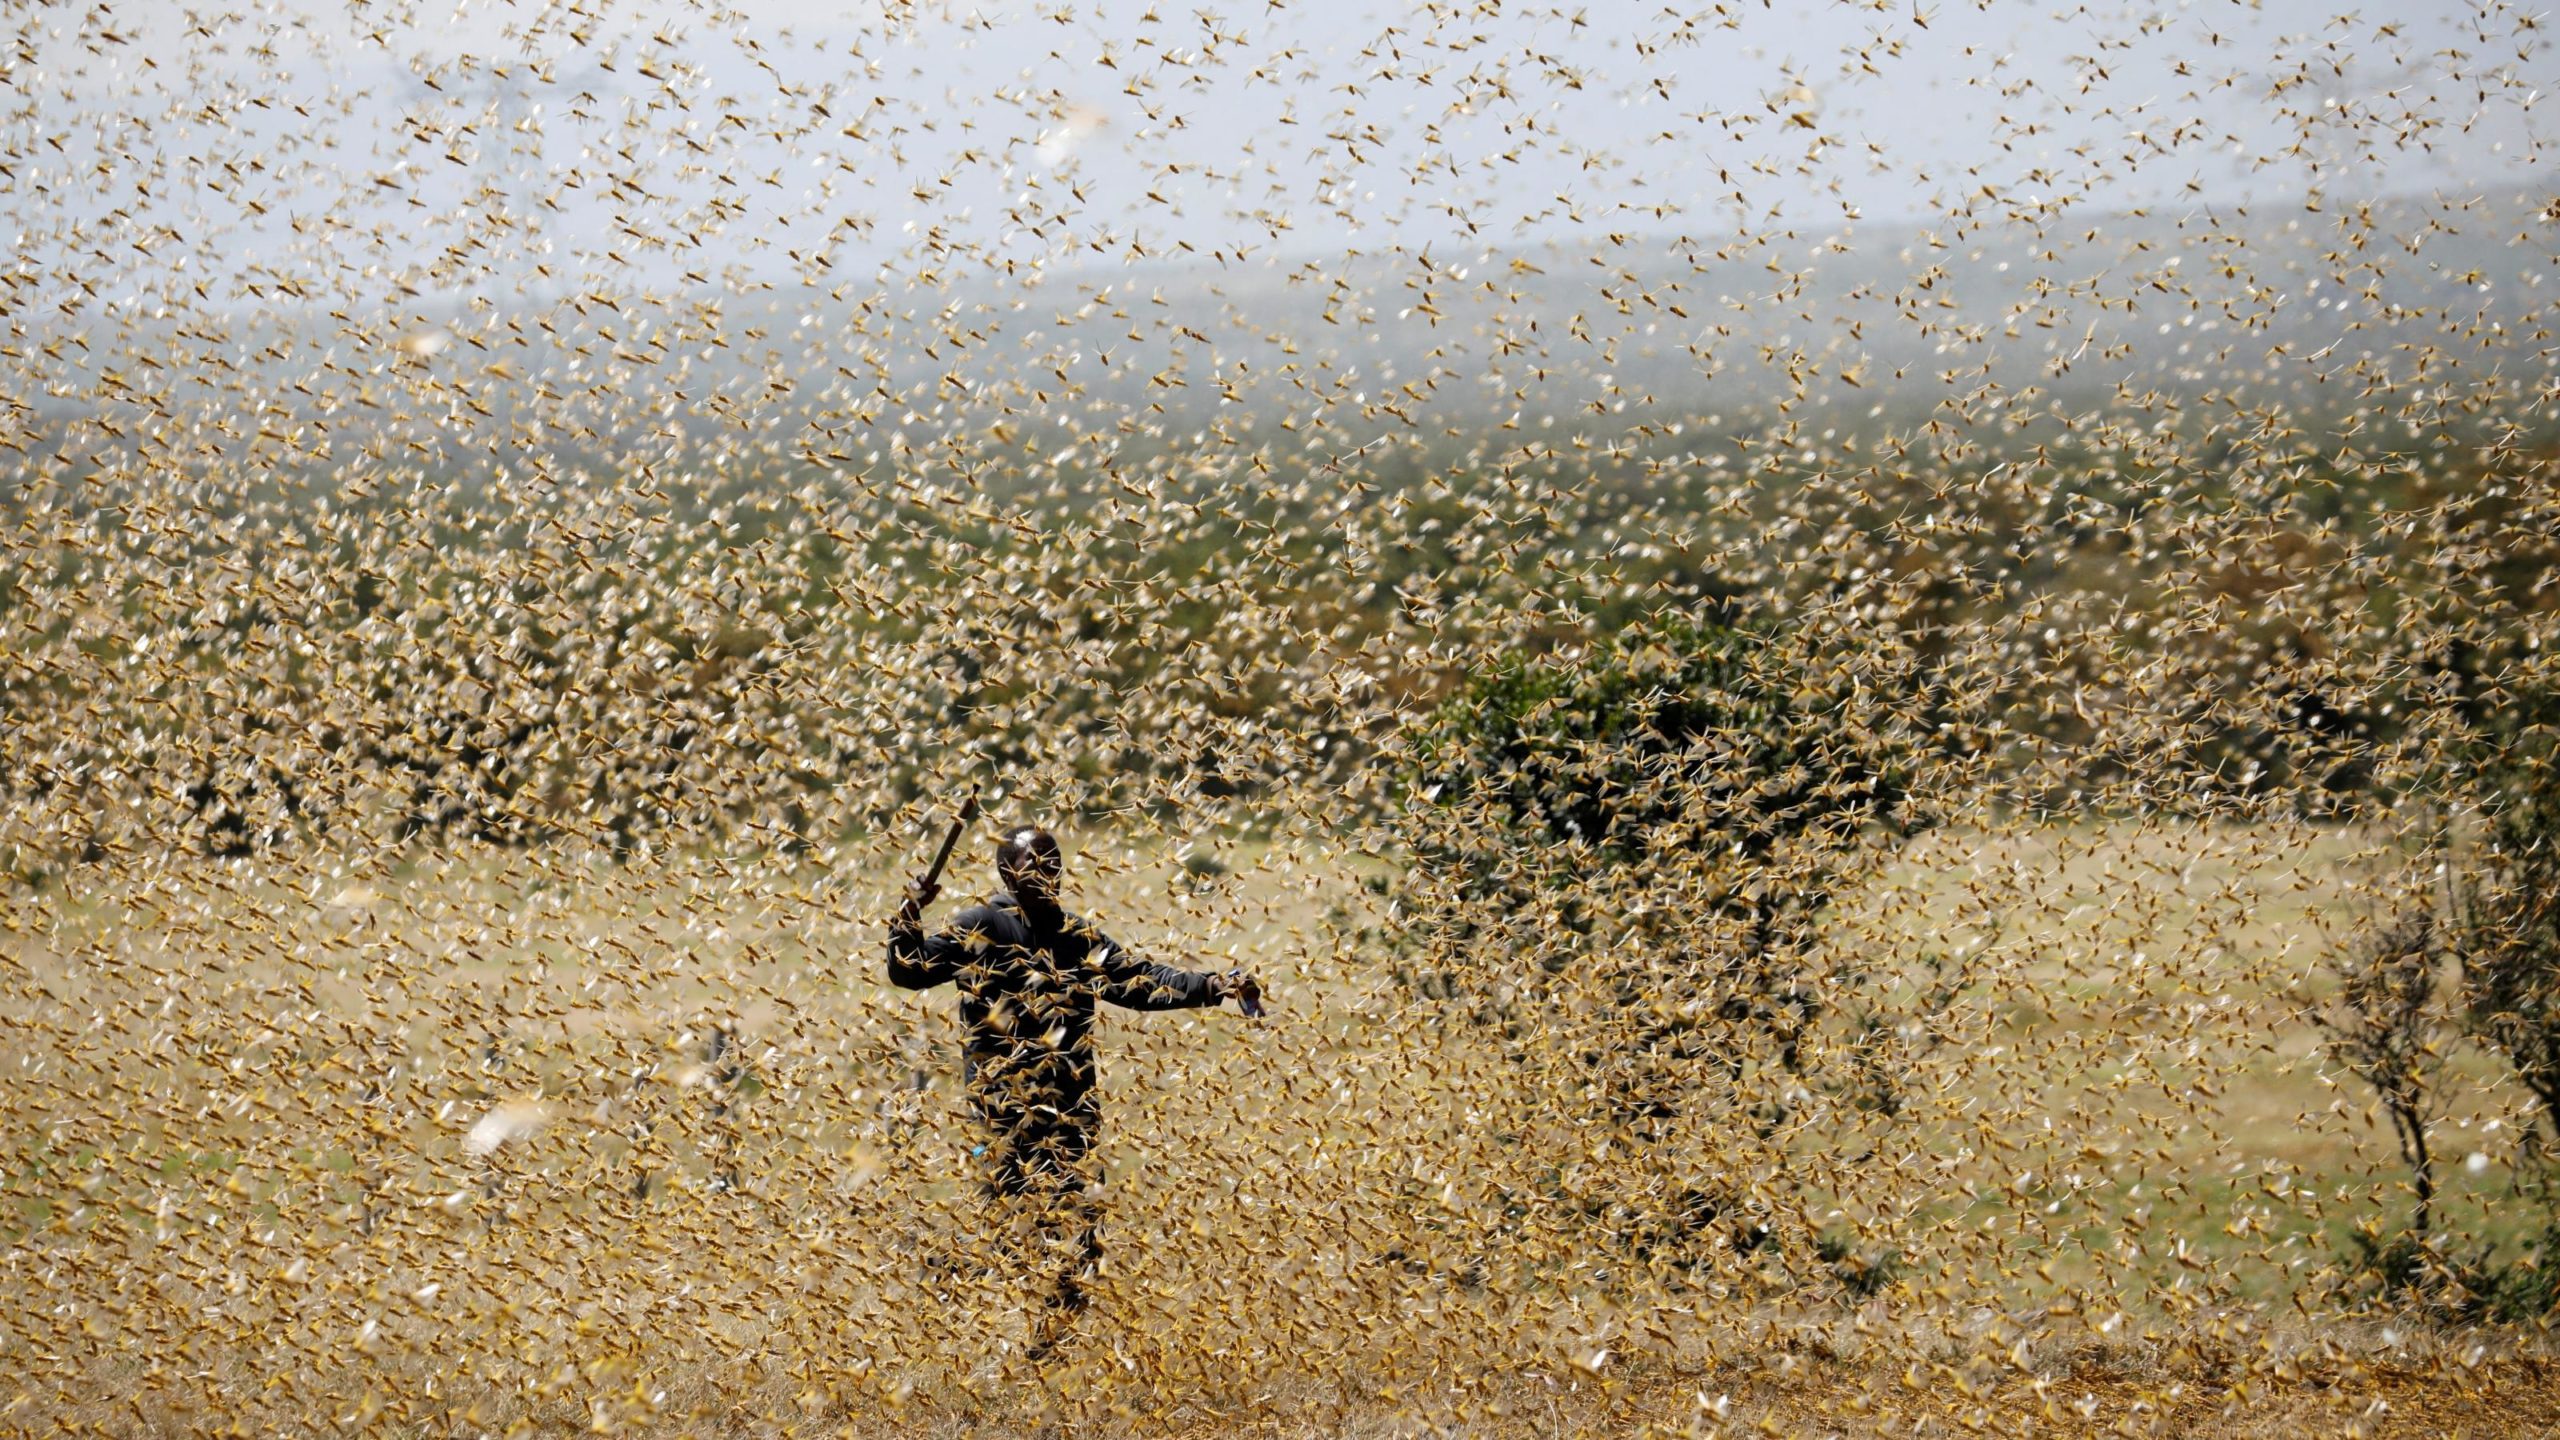 Explained: What is the locust plague and impact on India